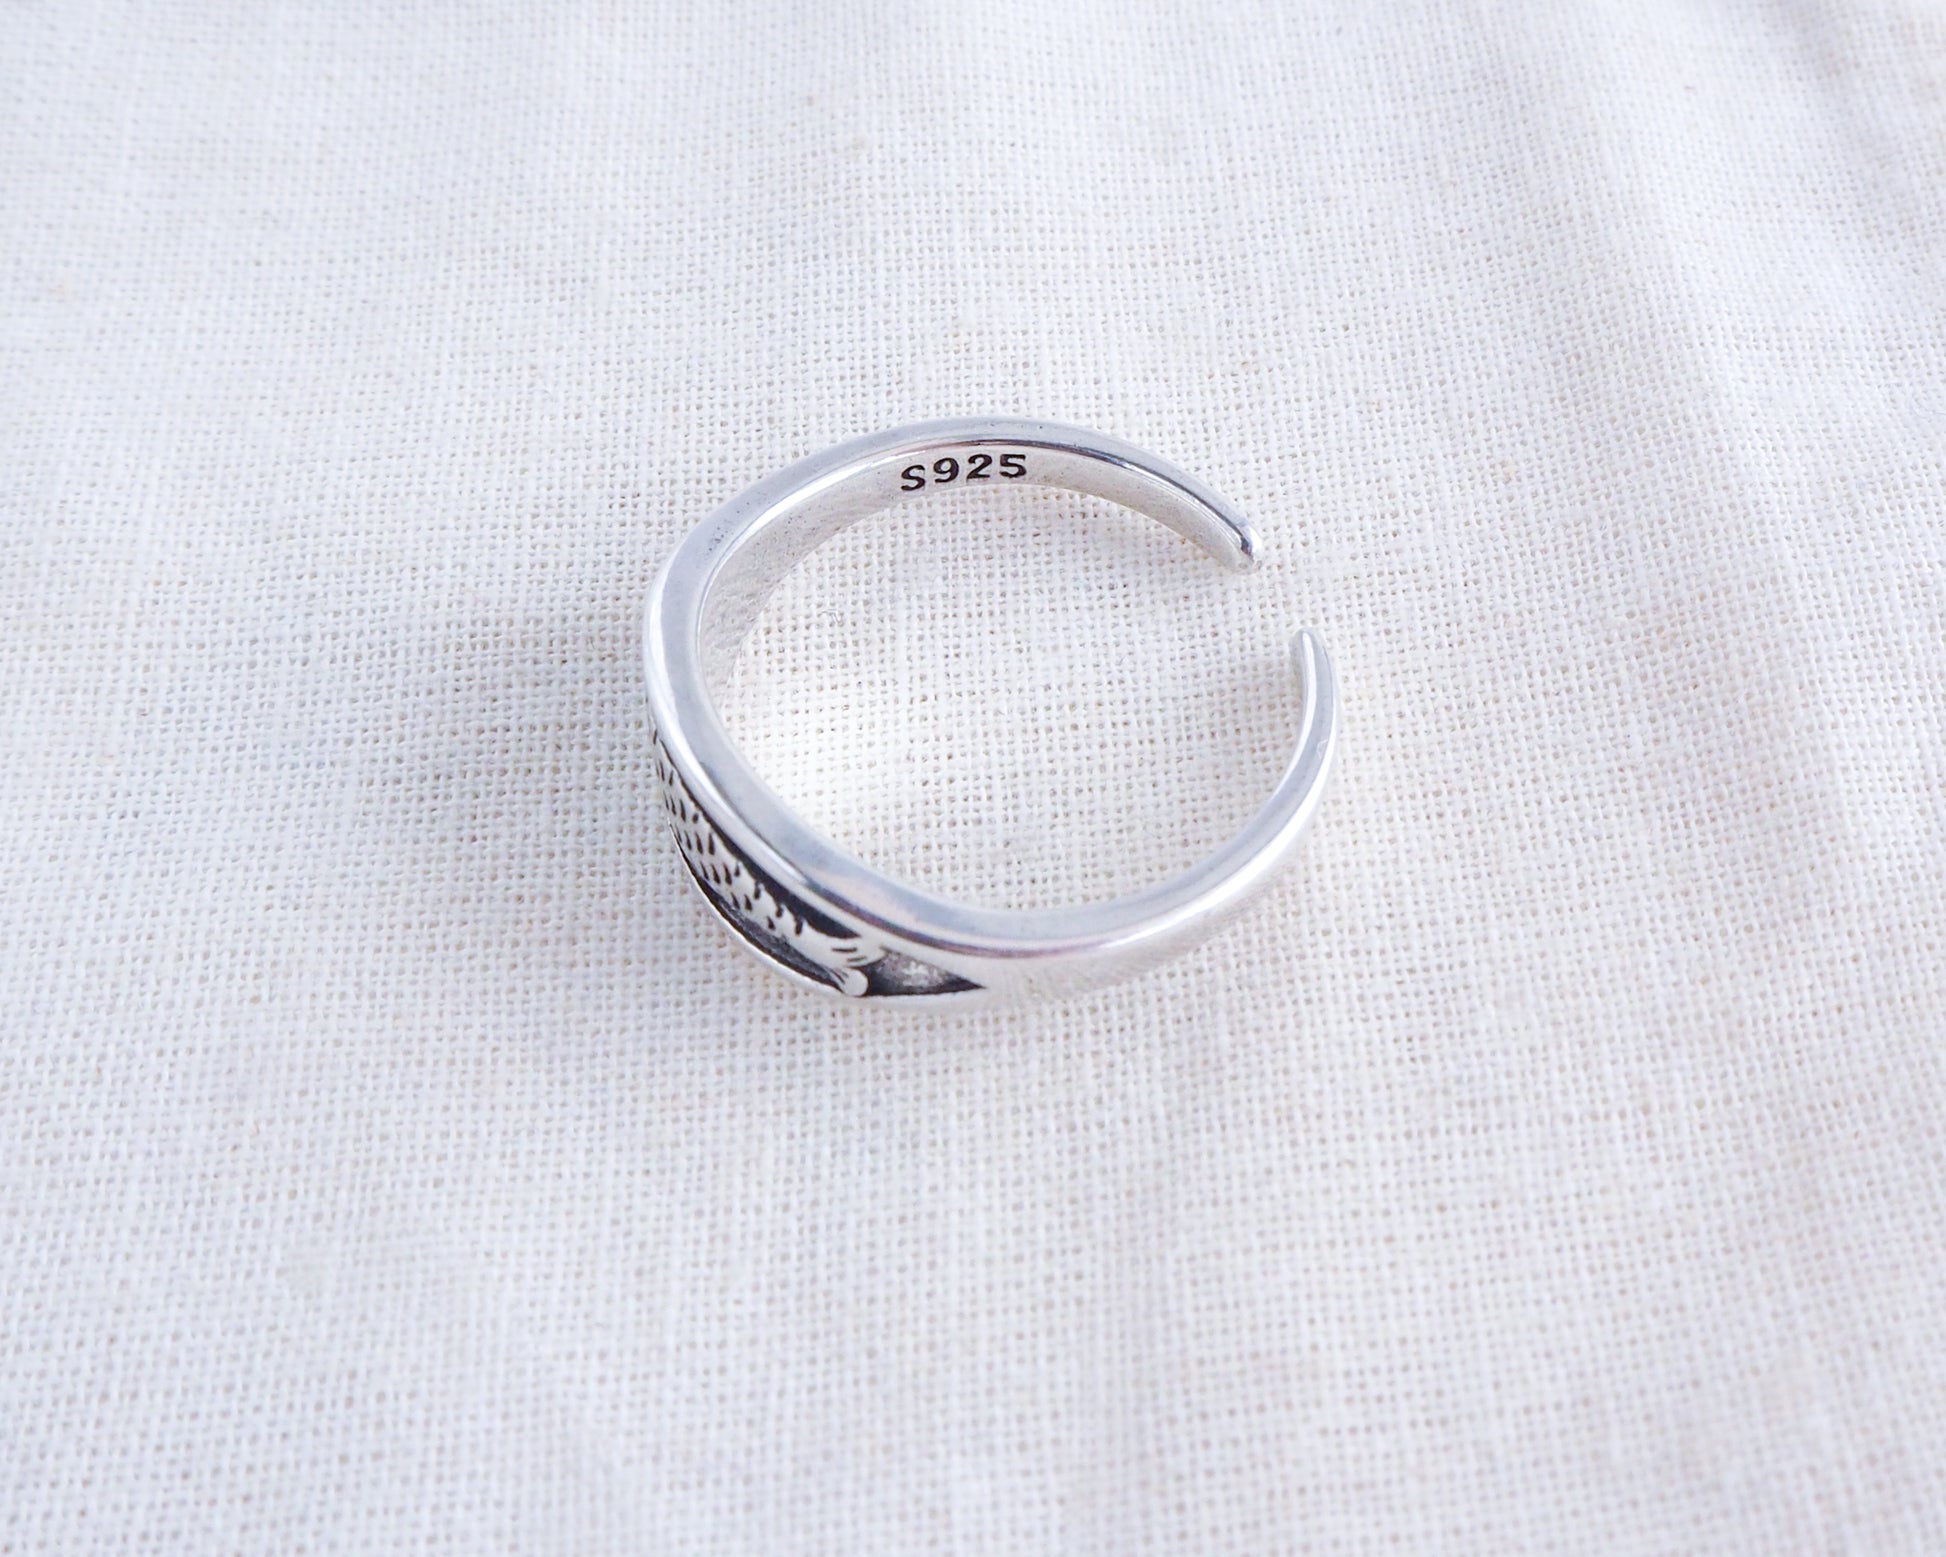 Sardine Fish Ring made with 925 Sterling silver on display, Sardine jewelry from Portugal, Coastal style, Minimalistic jewelry